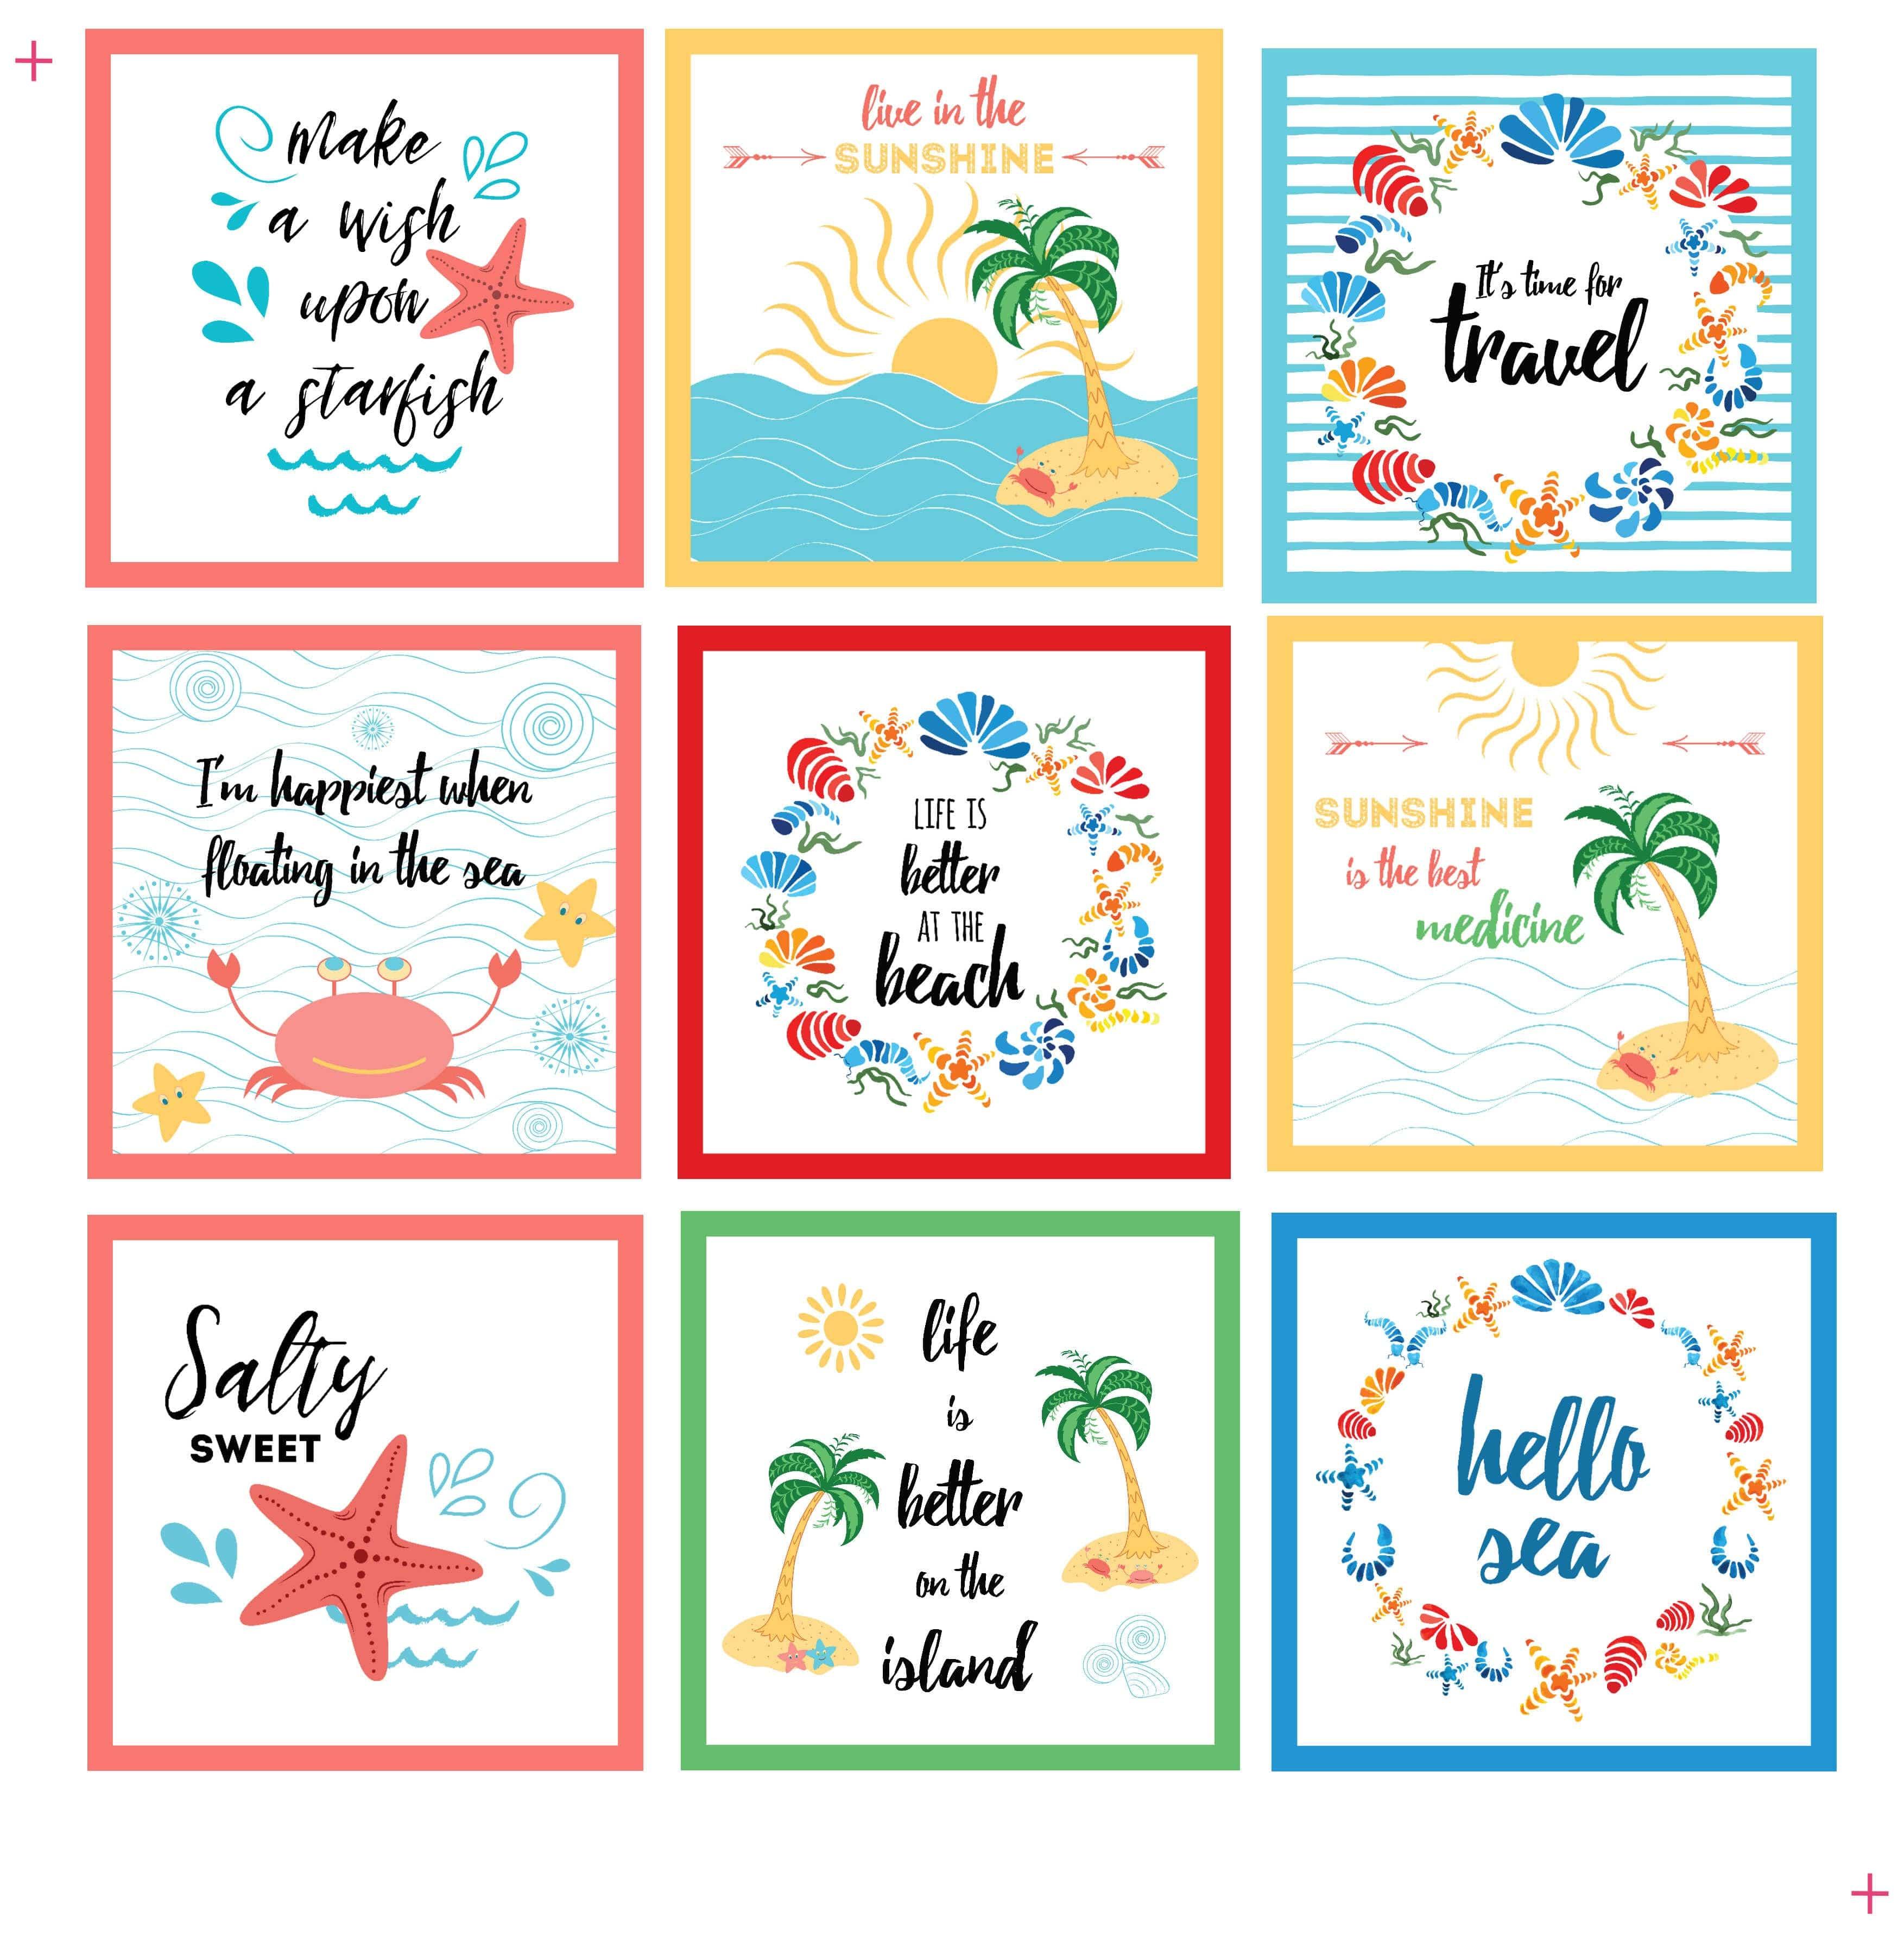 Quirky Quotes Collection Vacation Sayings Laser Cut Scrapbook or Card Embellishments by SSC Laser Designs -9 pieces